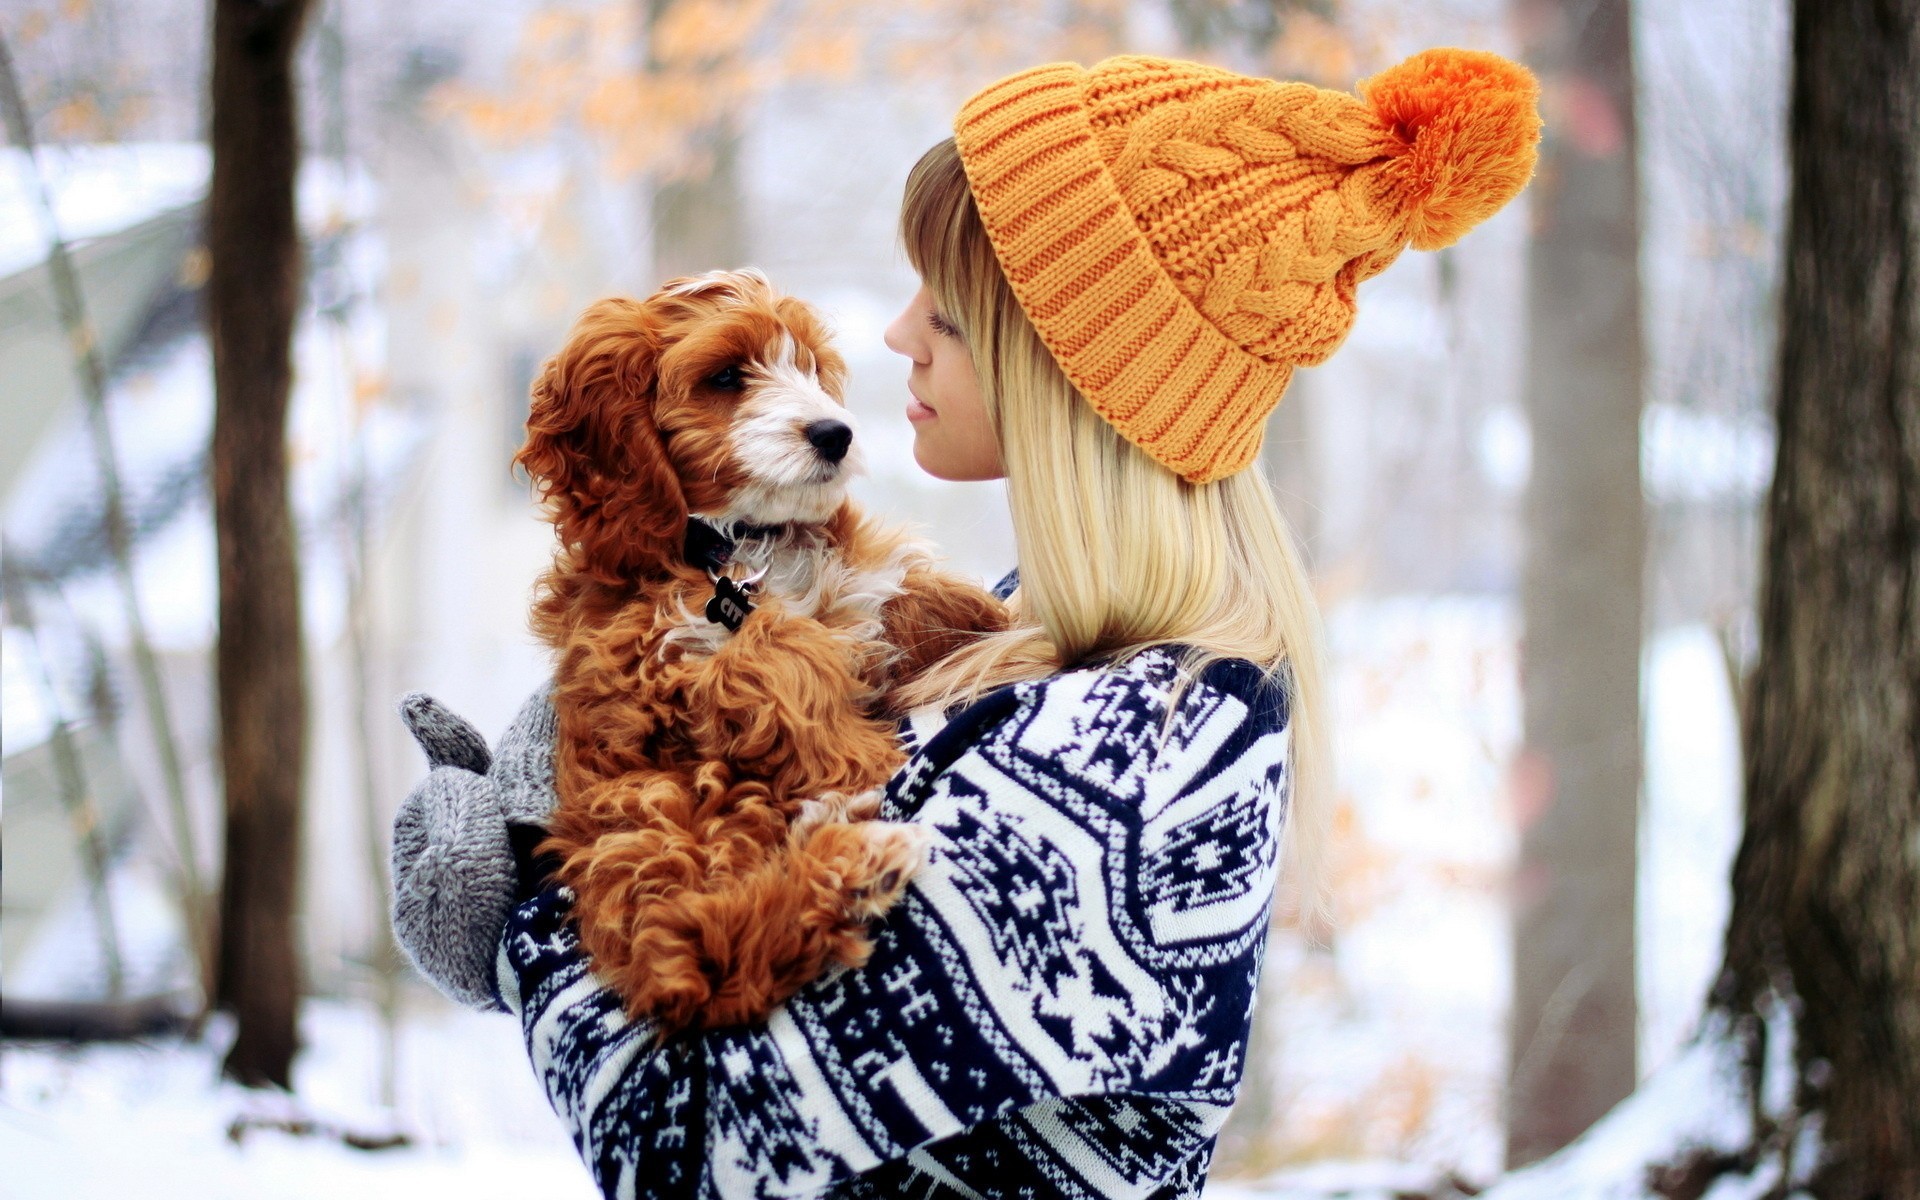 People 1920x1200 women model women outdoors women with dogs dog animals mammals wool cap hat women with hats blonde winter cold long hair gloves sweater